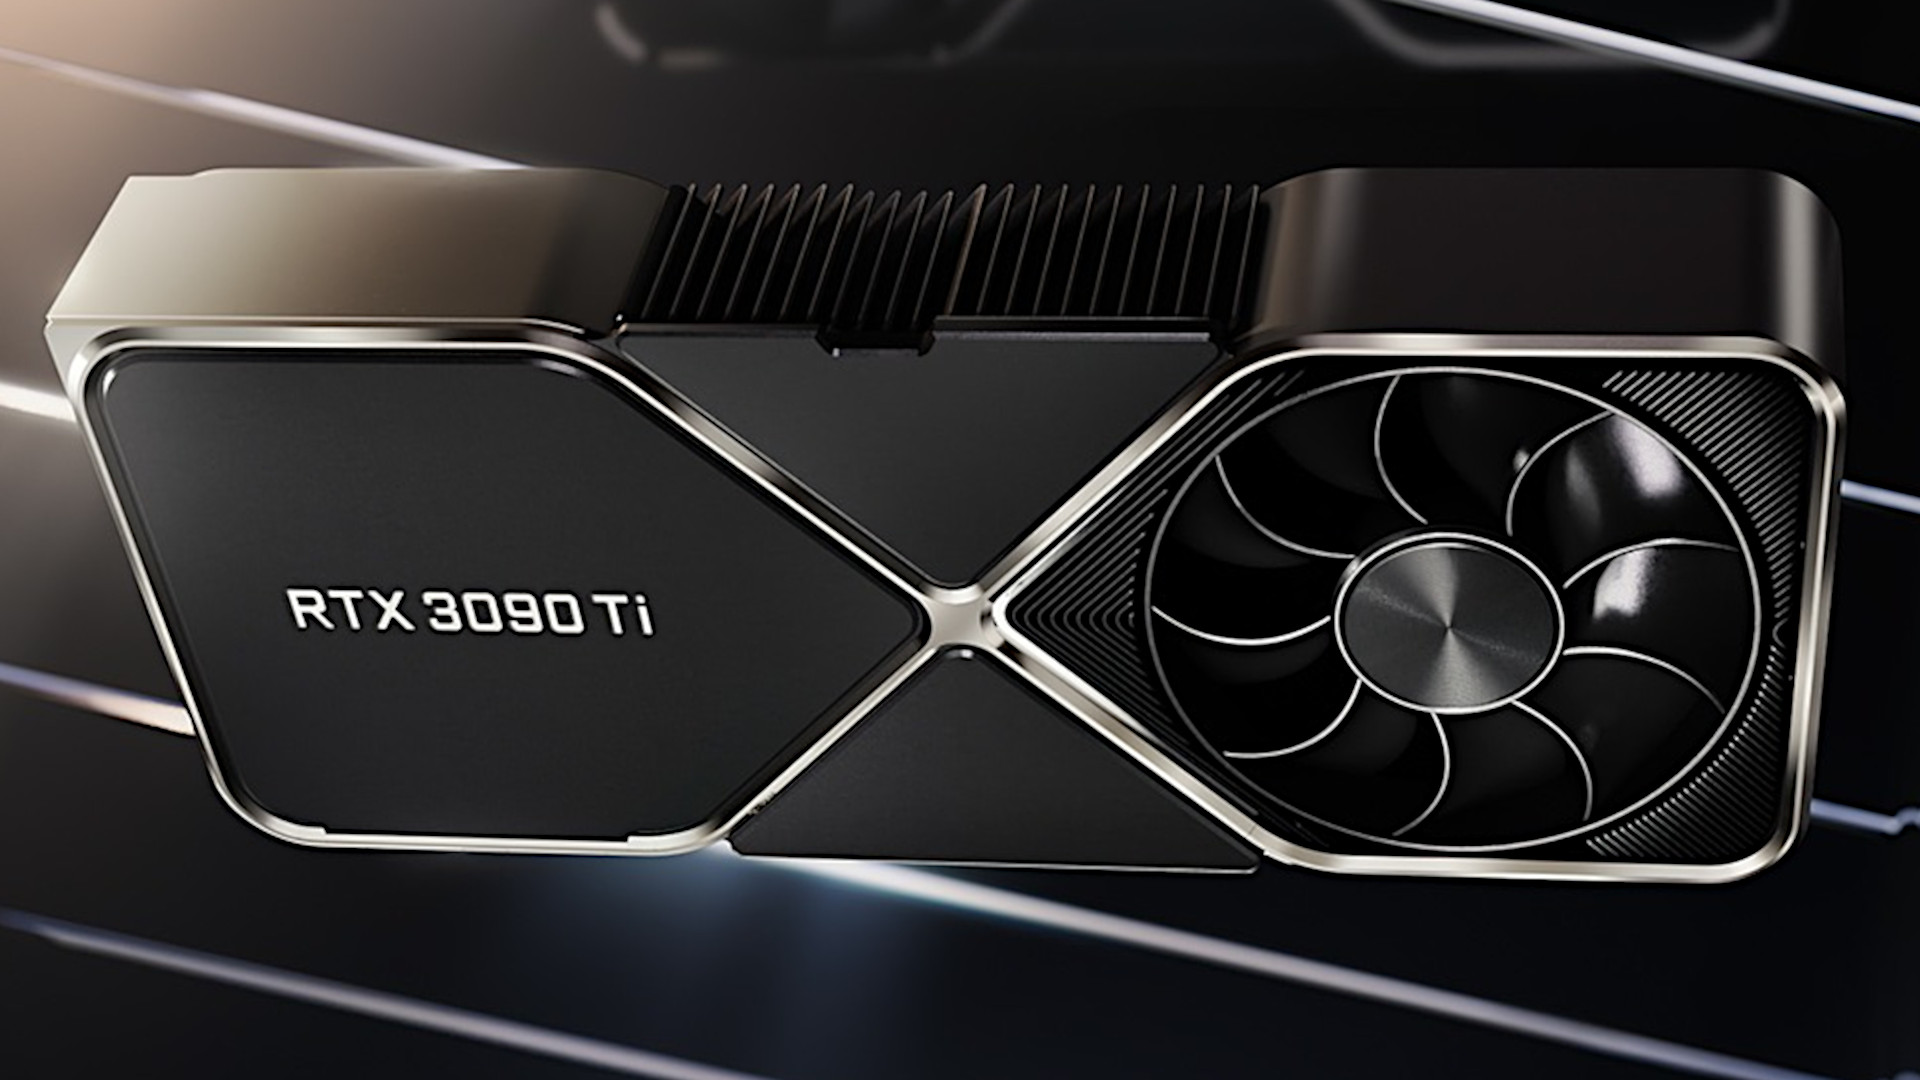 Nvidia GeForce RTX 3090 Ti prices, specs, benchmarks, and where to buy